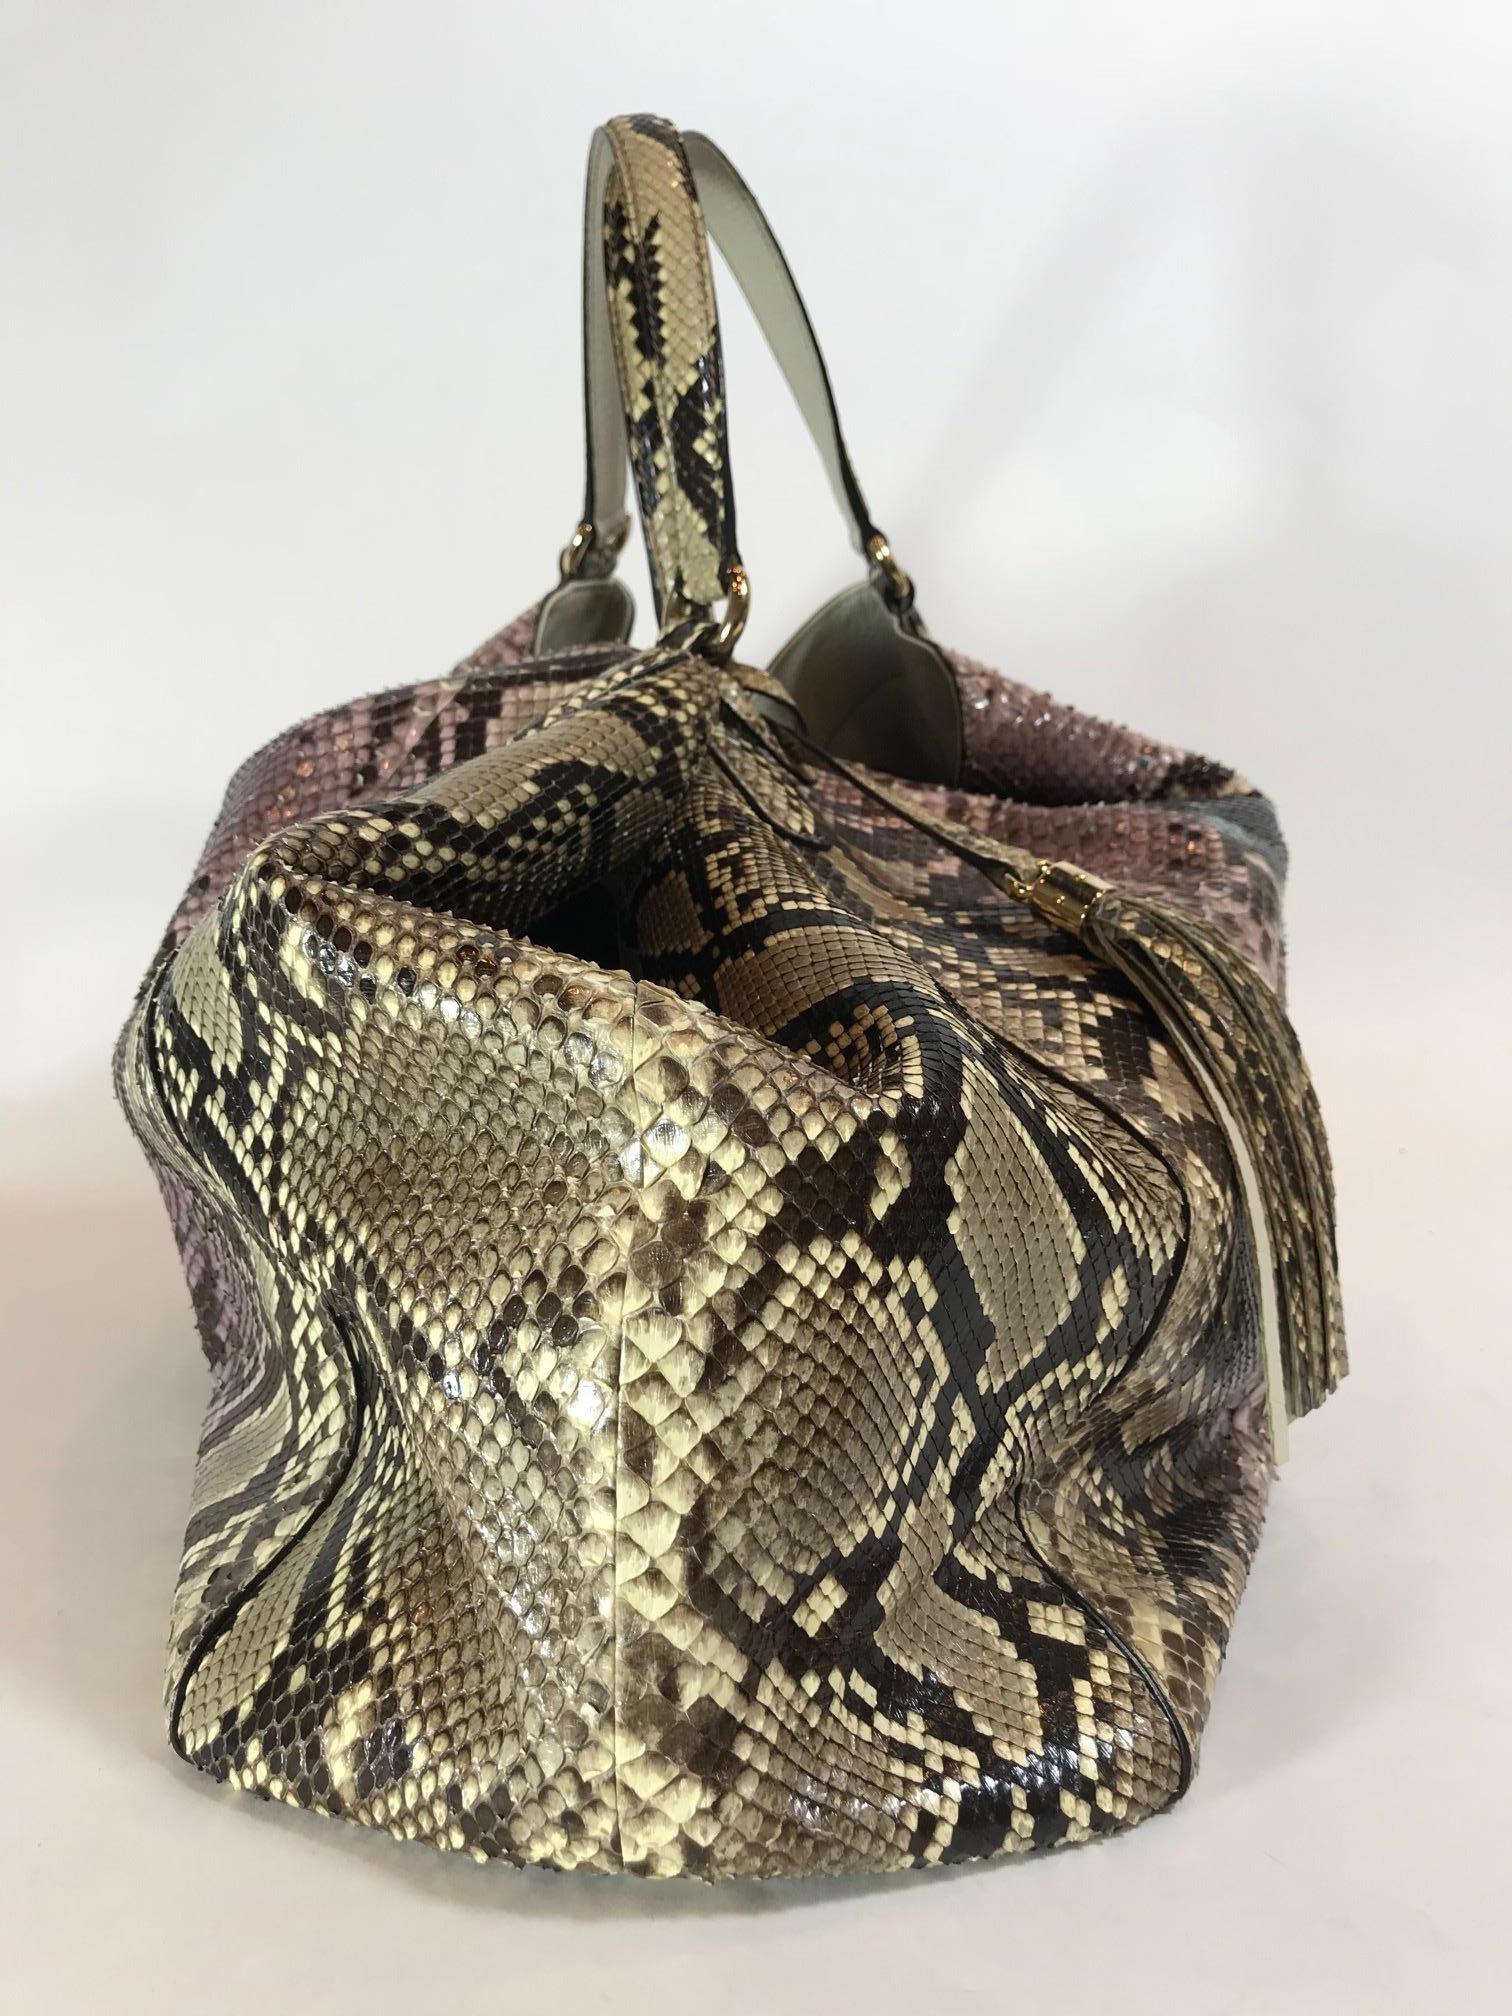 Multicolor Python featuring the iconic bold GG logo embroidered on the front. Silver-tone hardware. Dual flat shoulder straps. Detachable python tassel.  Off White leather interior. One large interior zippered pocket. Two interior opened pockets.